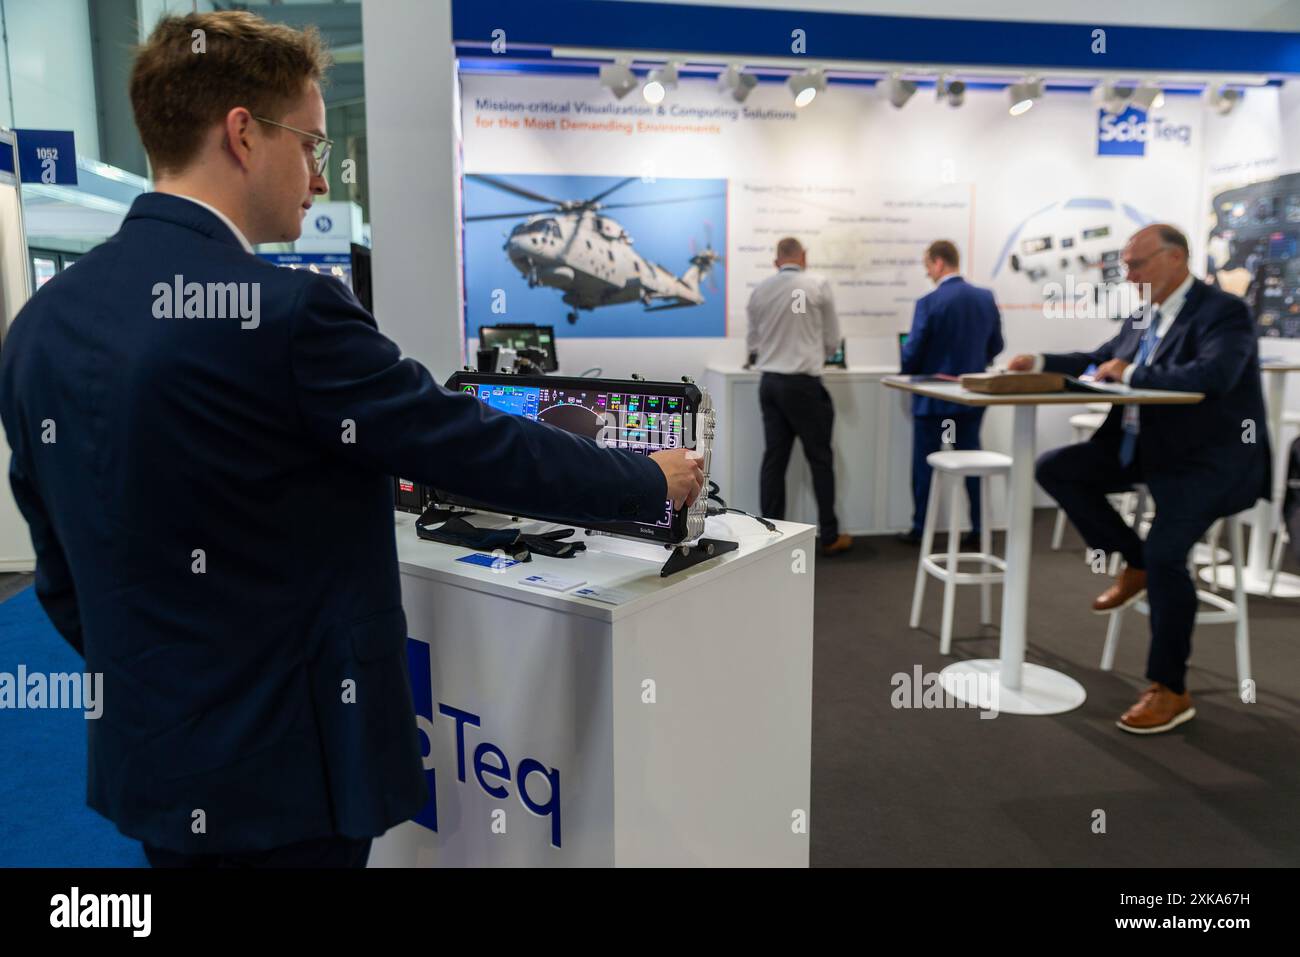 Farnborough Airport, Hampshire, UK. 22nd Jul, 2024. The world’s military and civil aviation businesses have gathered to display and view the latest in aerospace technology. Stands in the halls display components, services and weaponry. Stock Photo